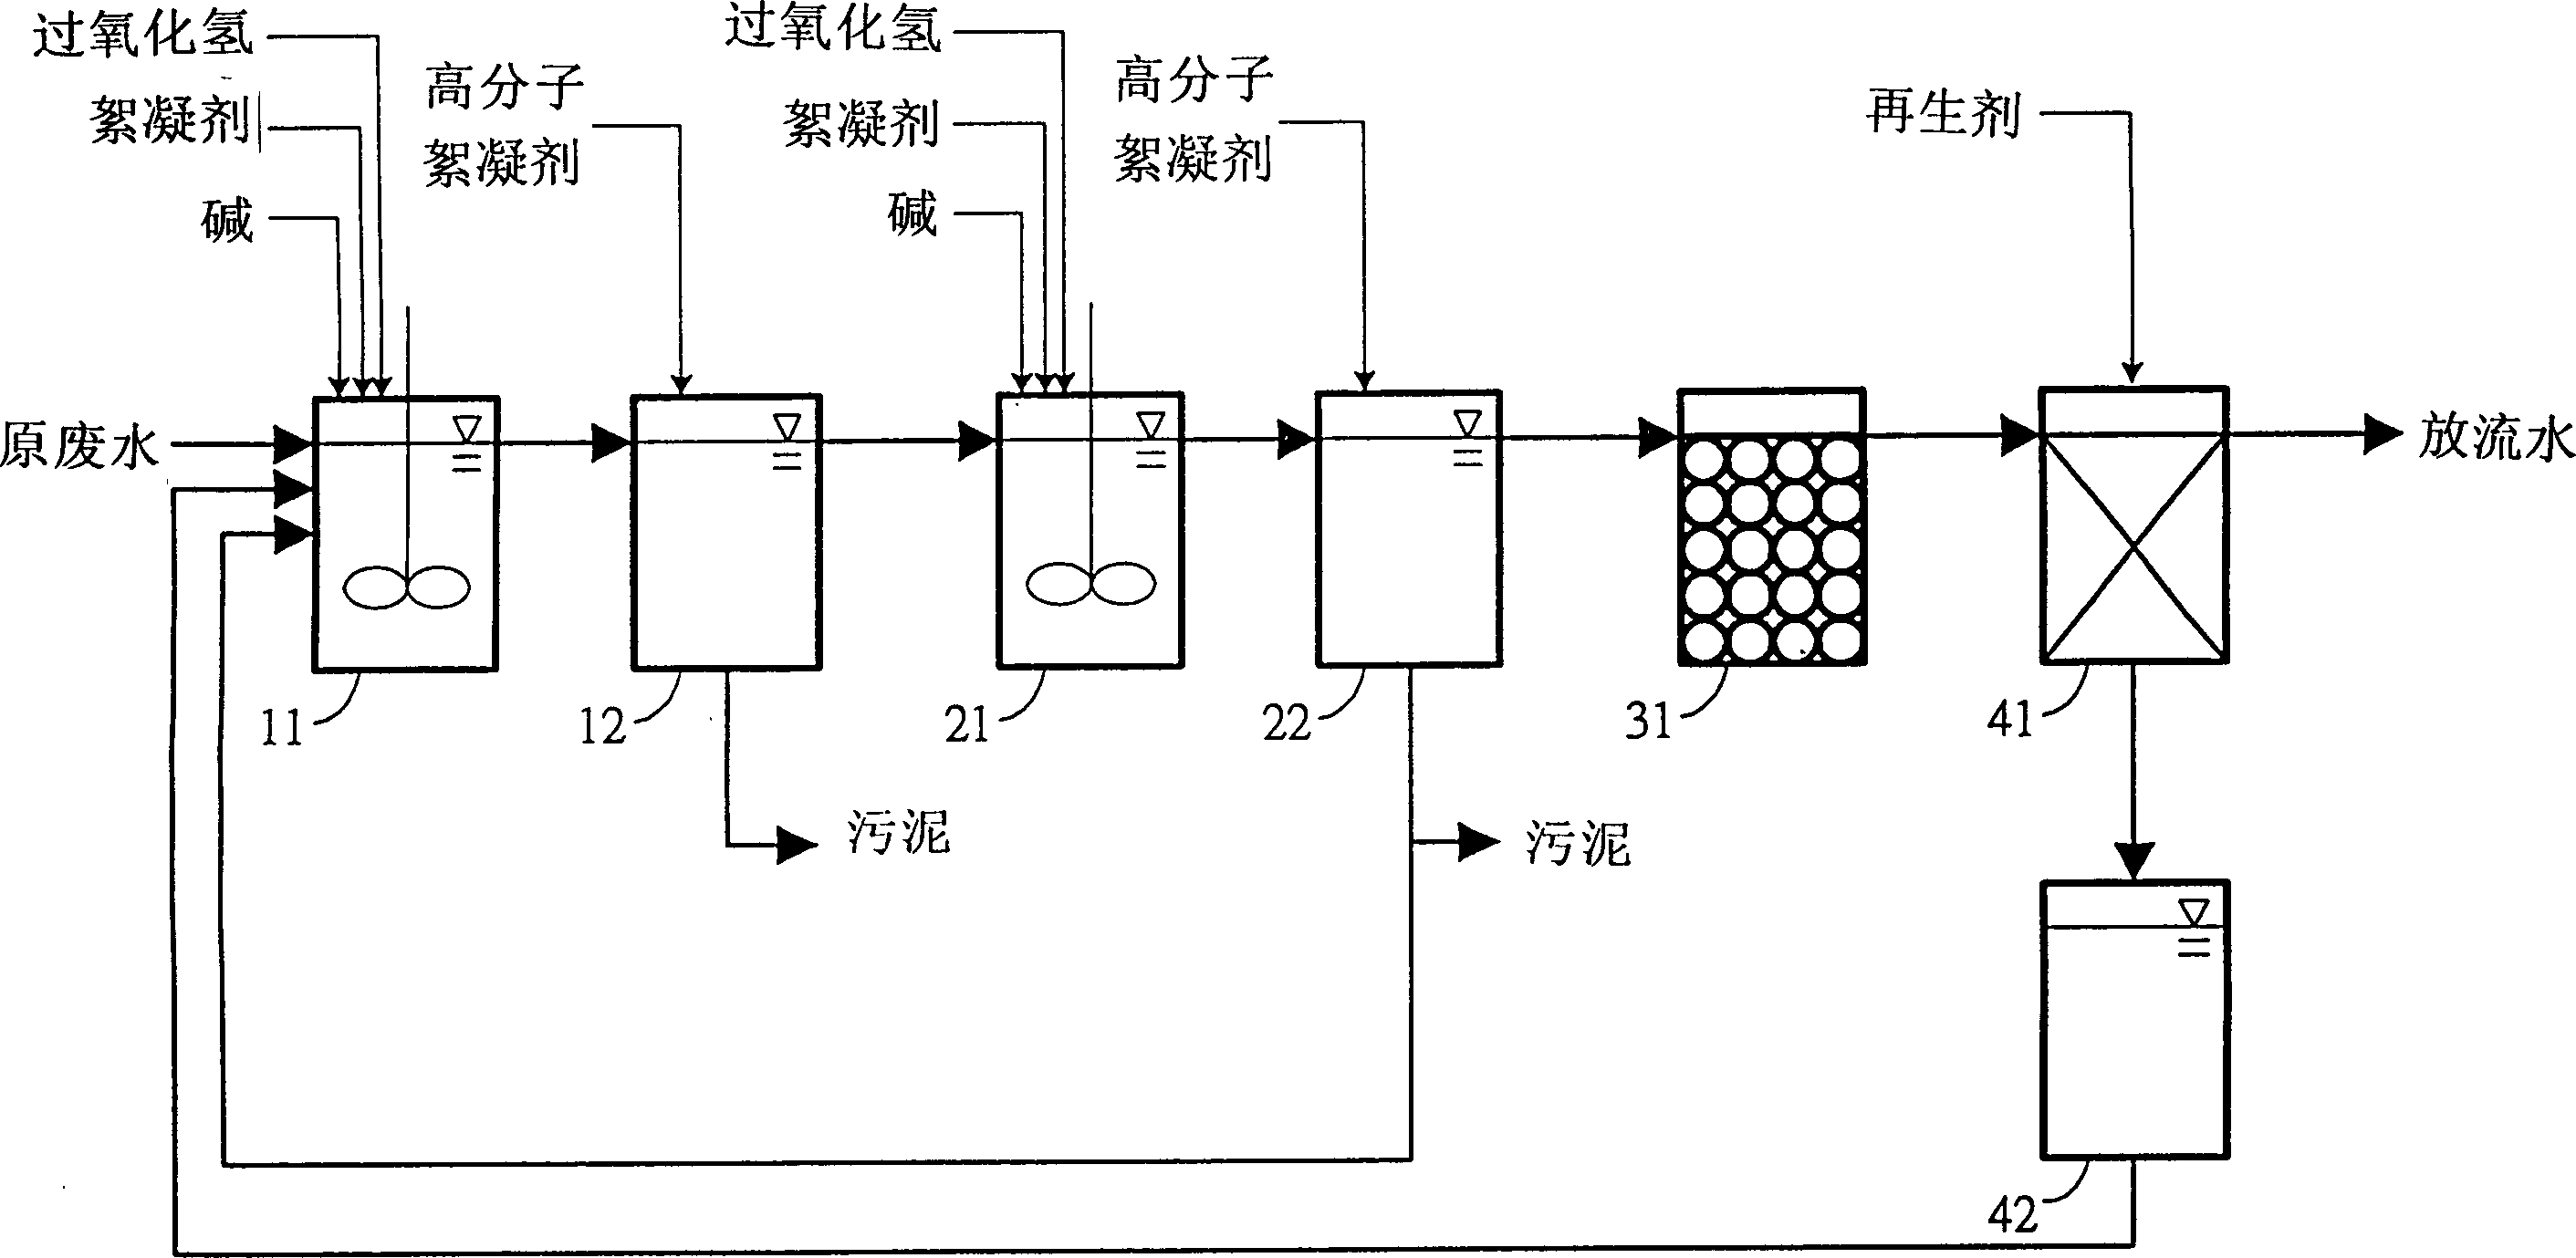 Process for treatment of waste water containing boron